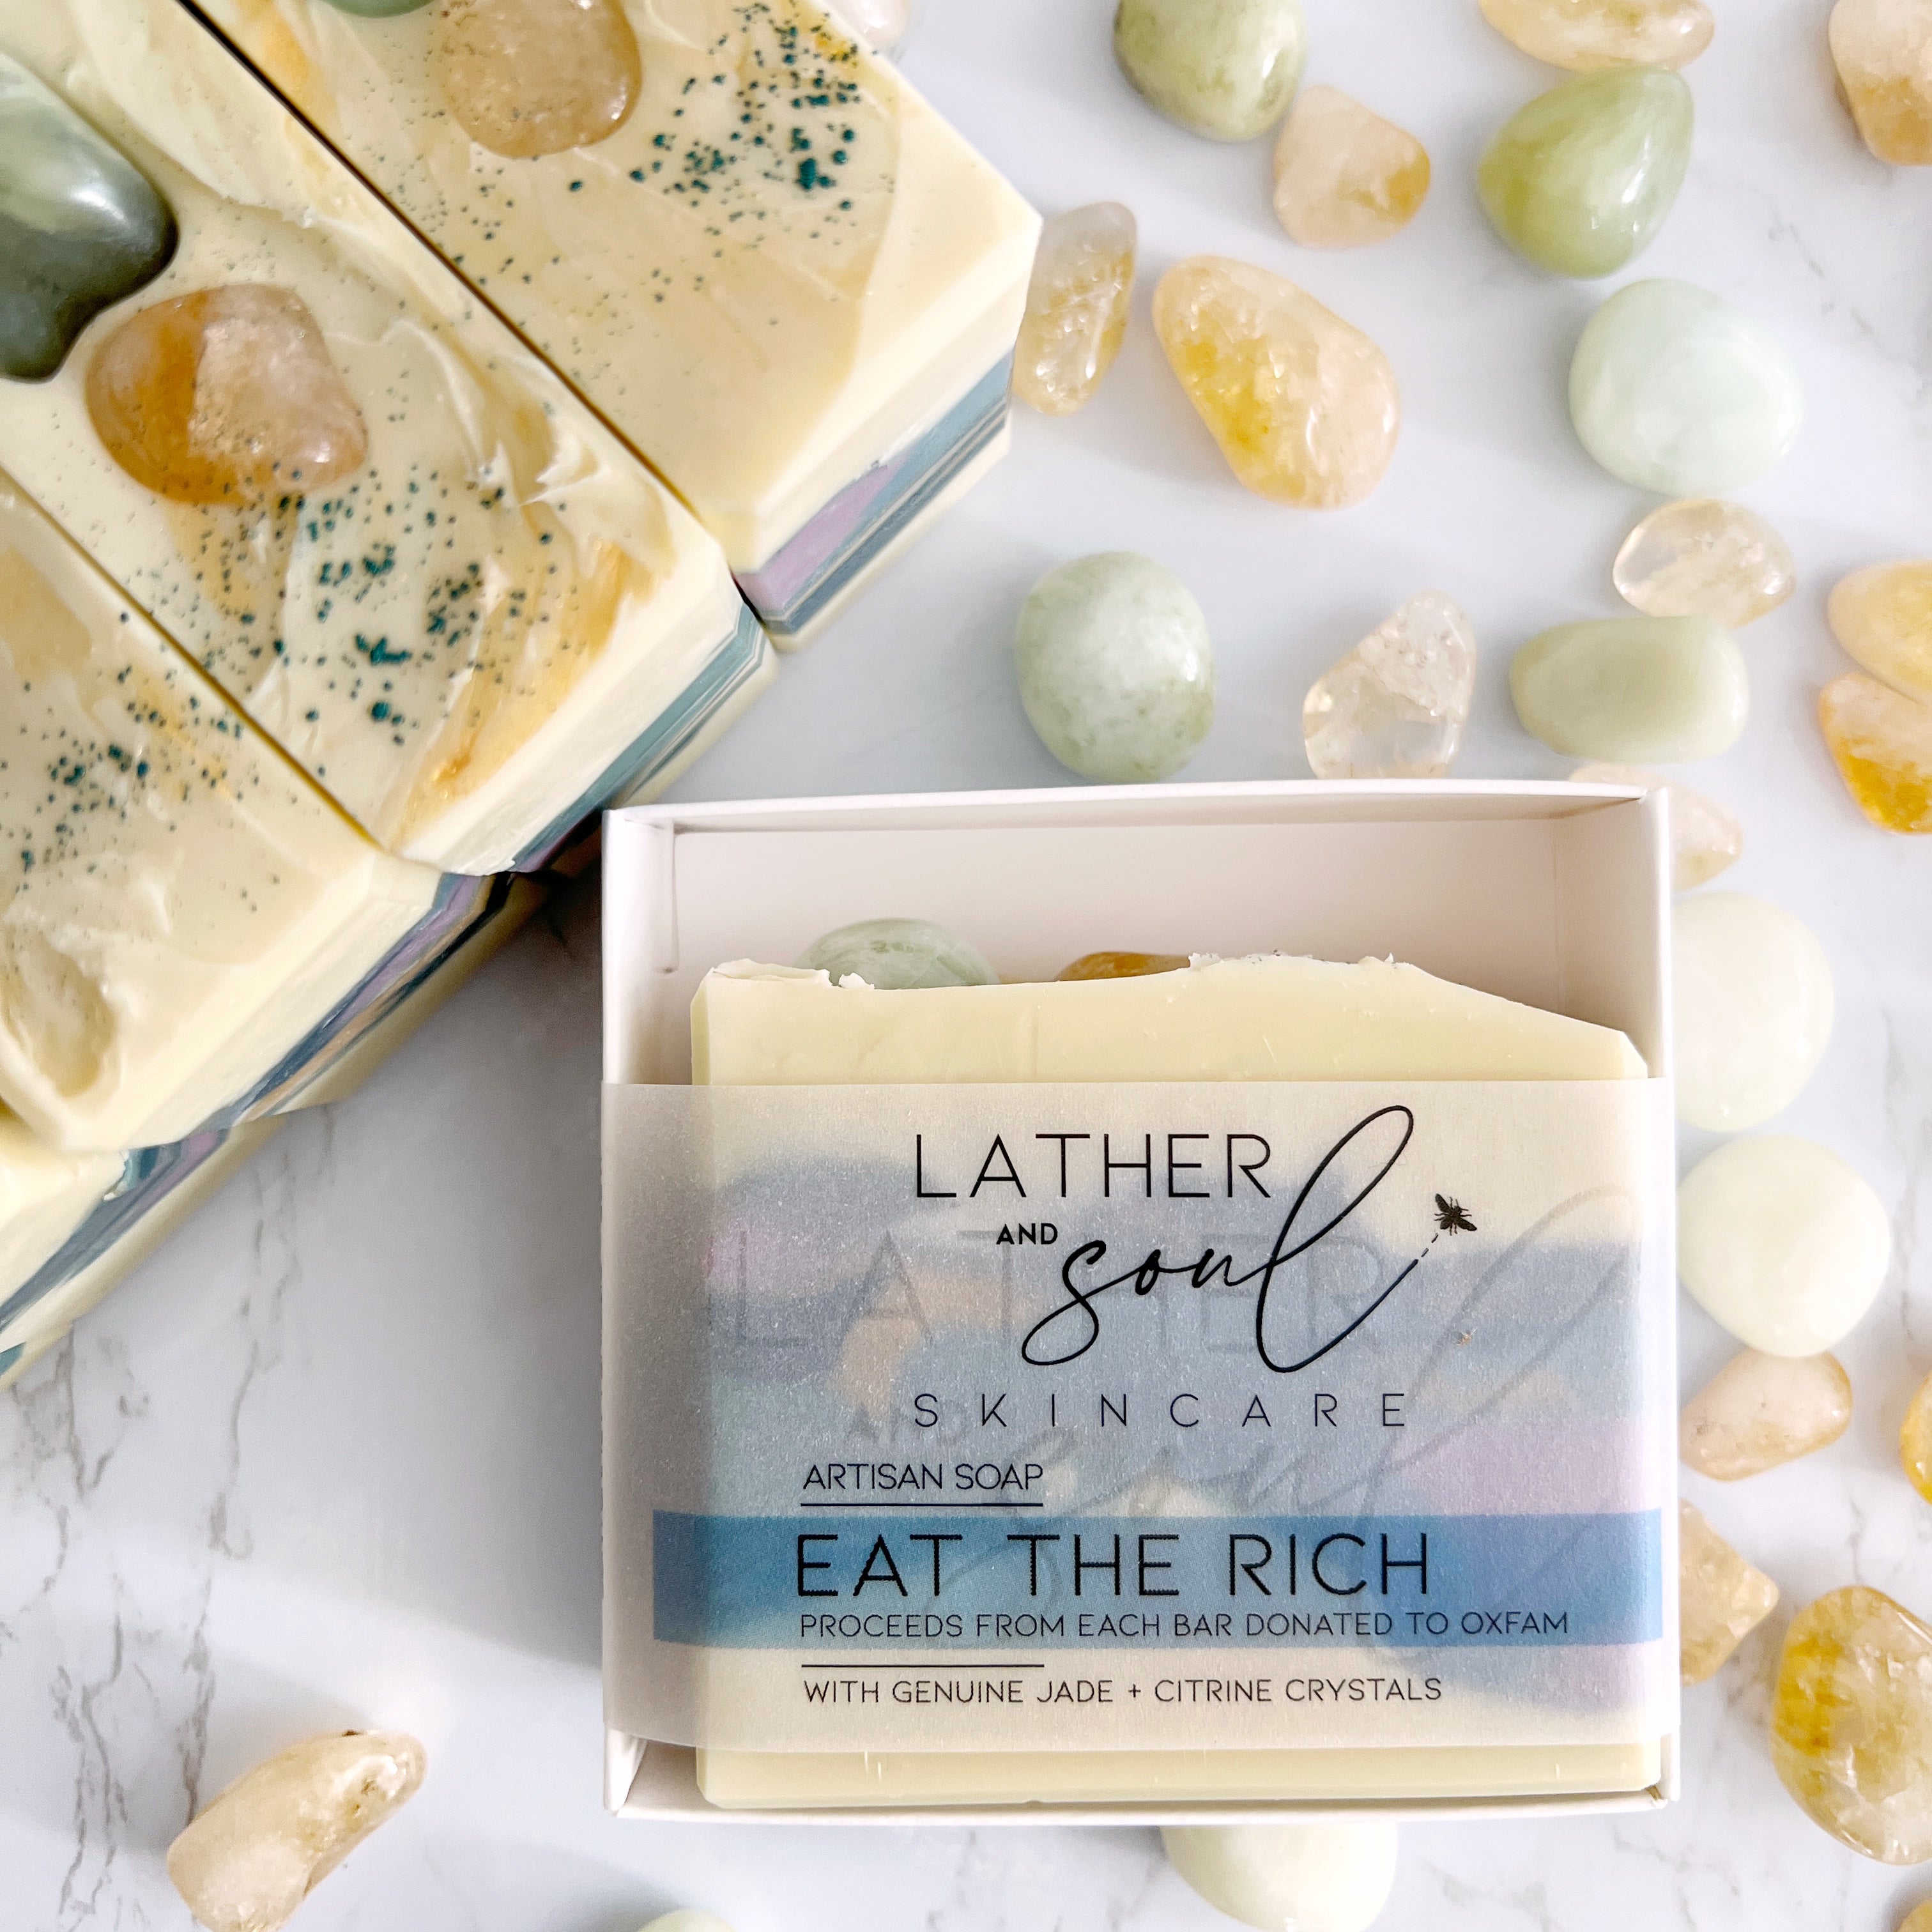 "Eat the Rich" crystal soaps because no one needs a billion dollars while other struggle for life's basic needs